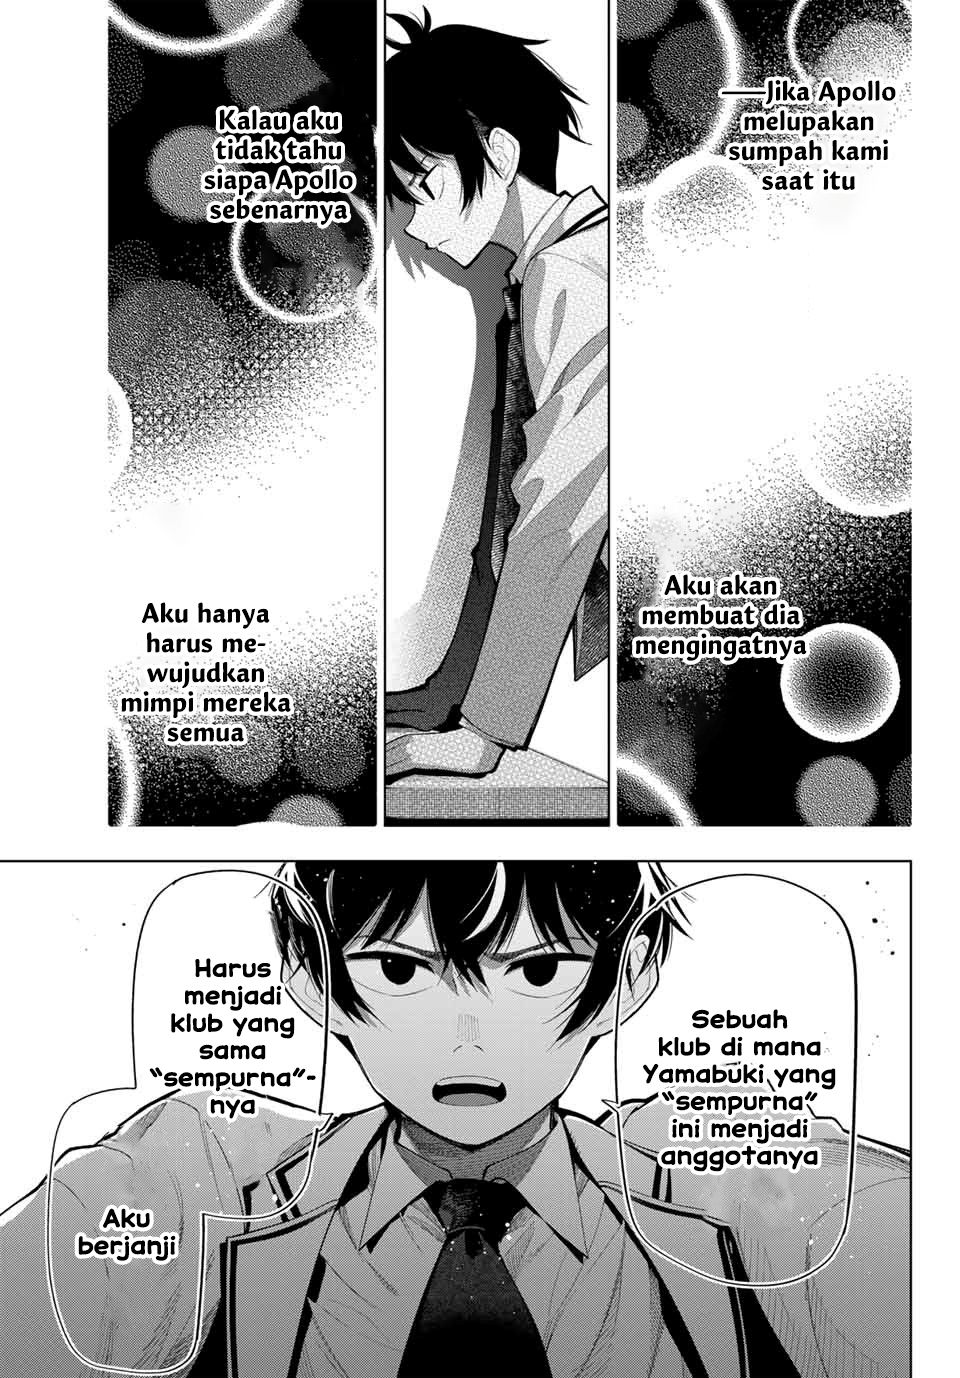 Mayonaka Heart Tune (Tune In to the Midnight Heart) Chapter 02 Image 38